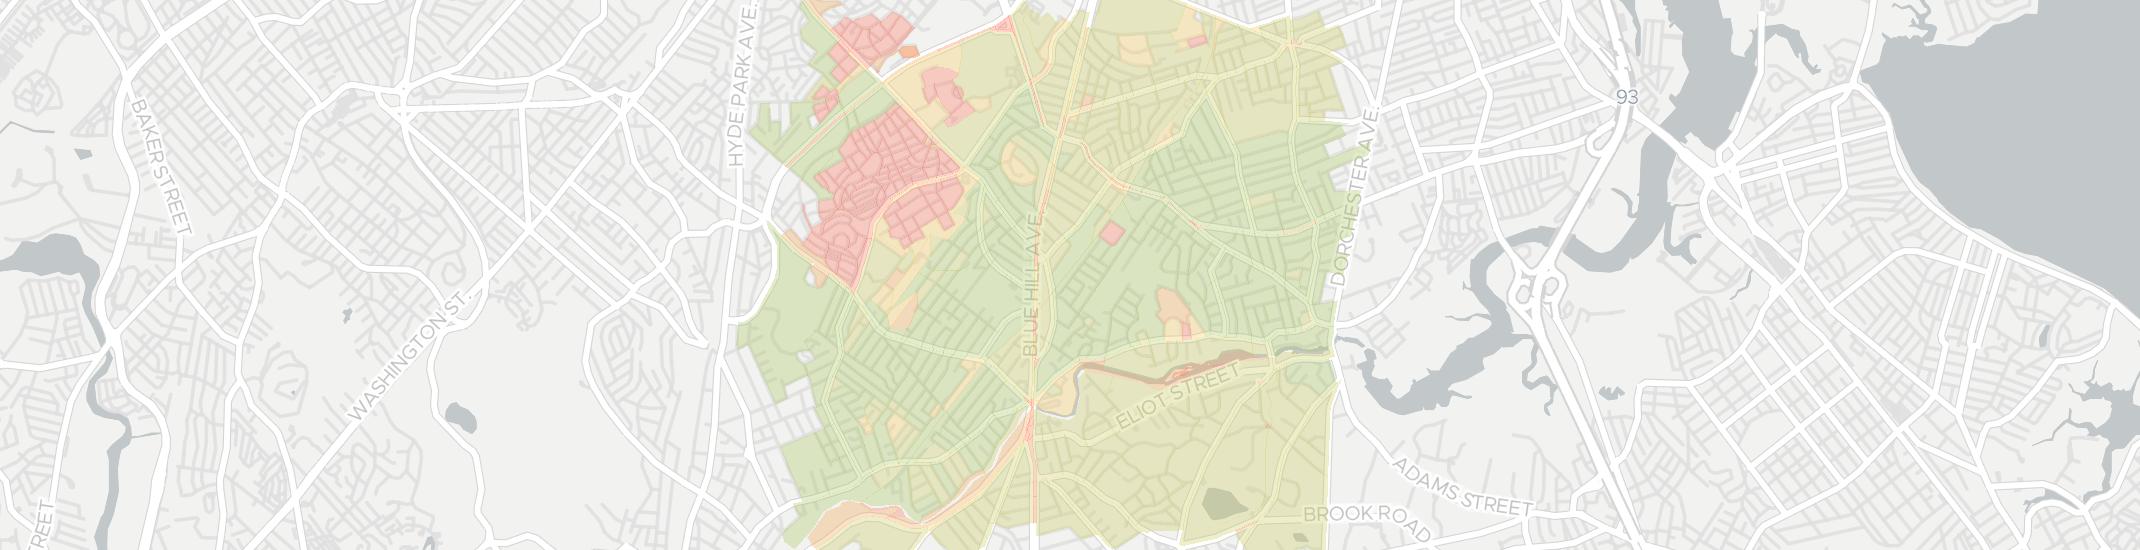 Mattapan Internet Competition Map. Click for interactive map